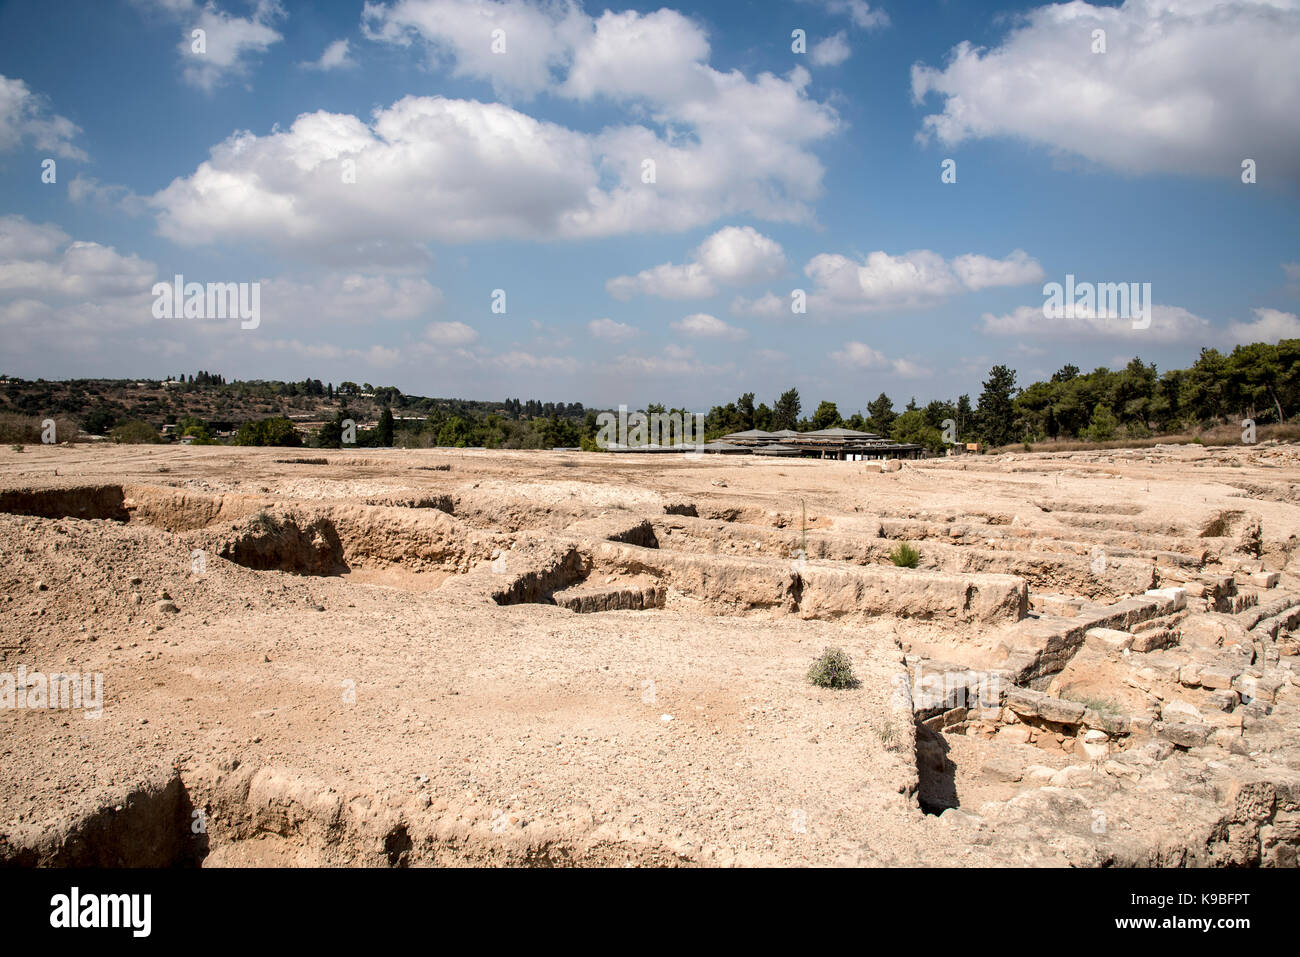 Israel, Galilee, Zippori National Park A mishnaic-period city with an abundance of mosaics General view of the ruins Stock Photo